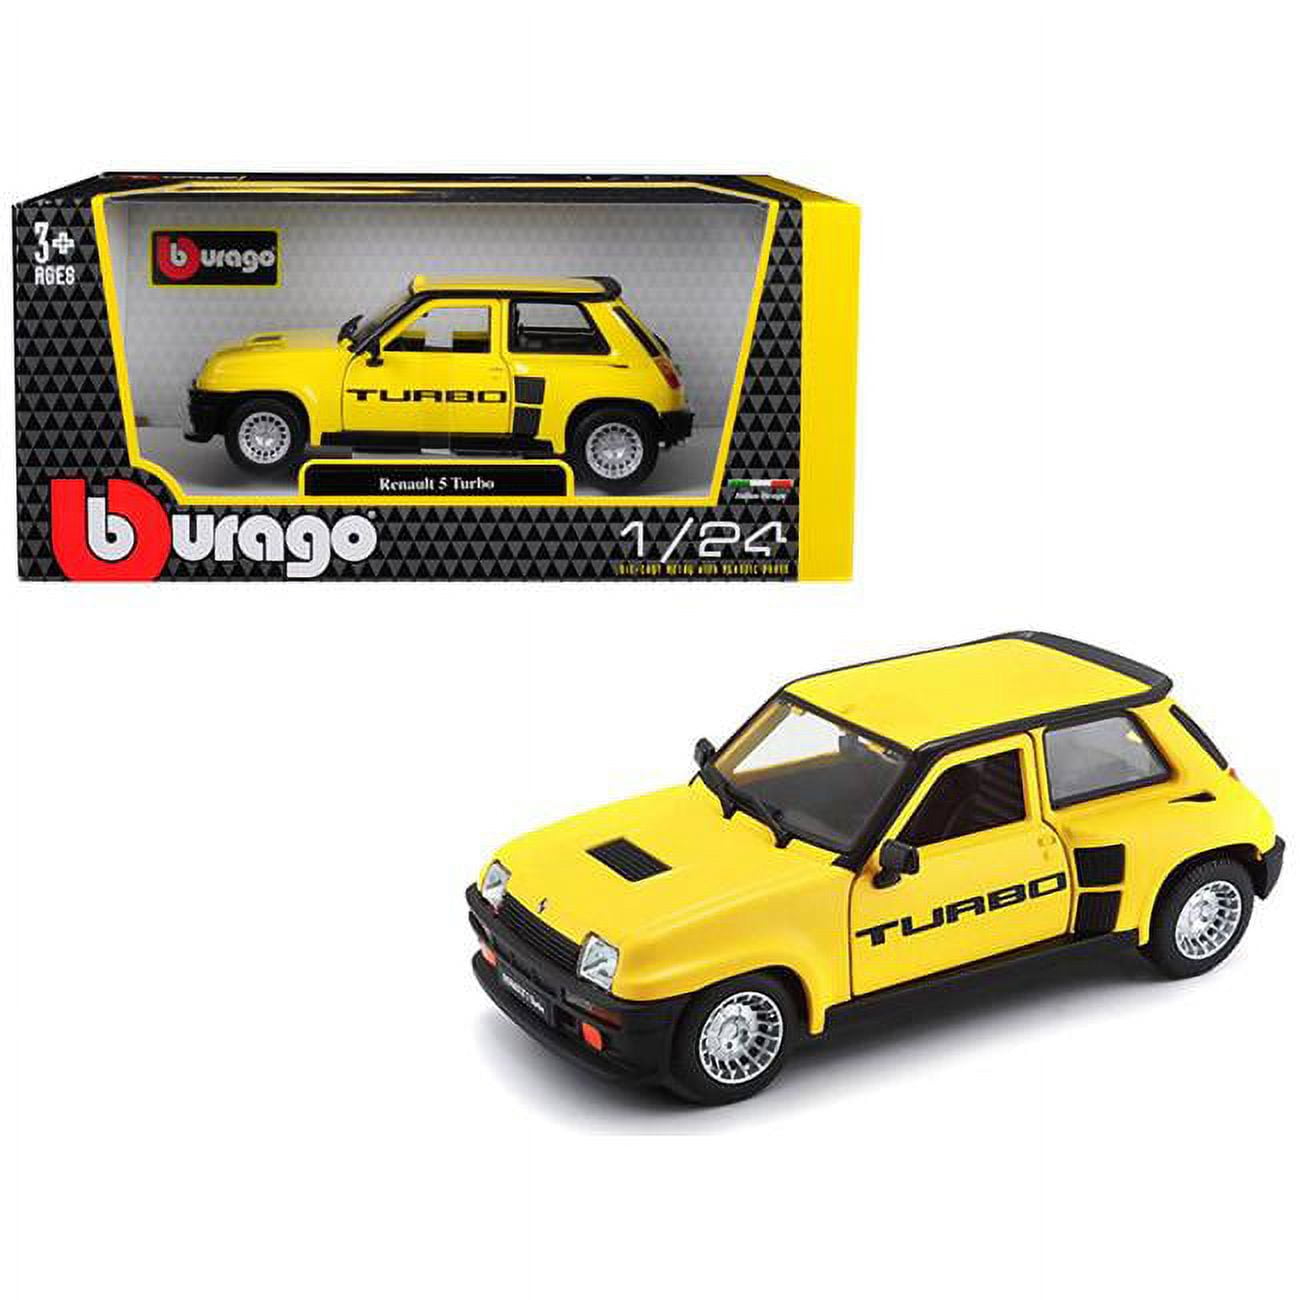 B 21088y Renault 5 Turbo Yellow With Black Accents 1-24 Diecast Model Car